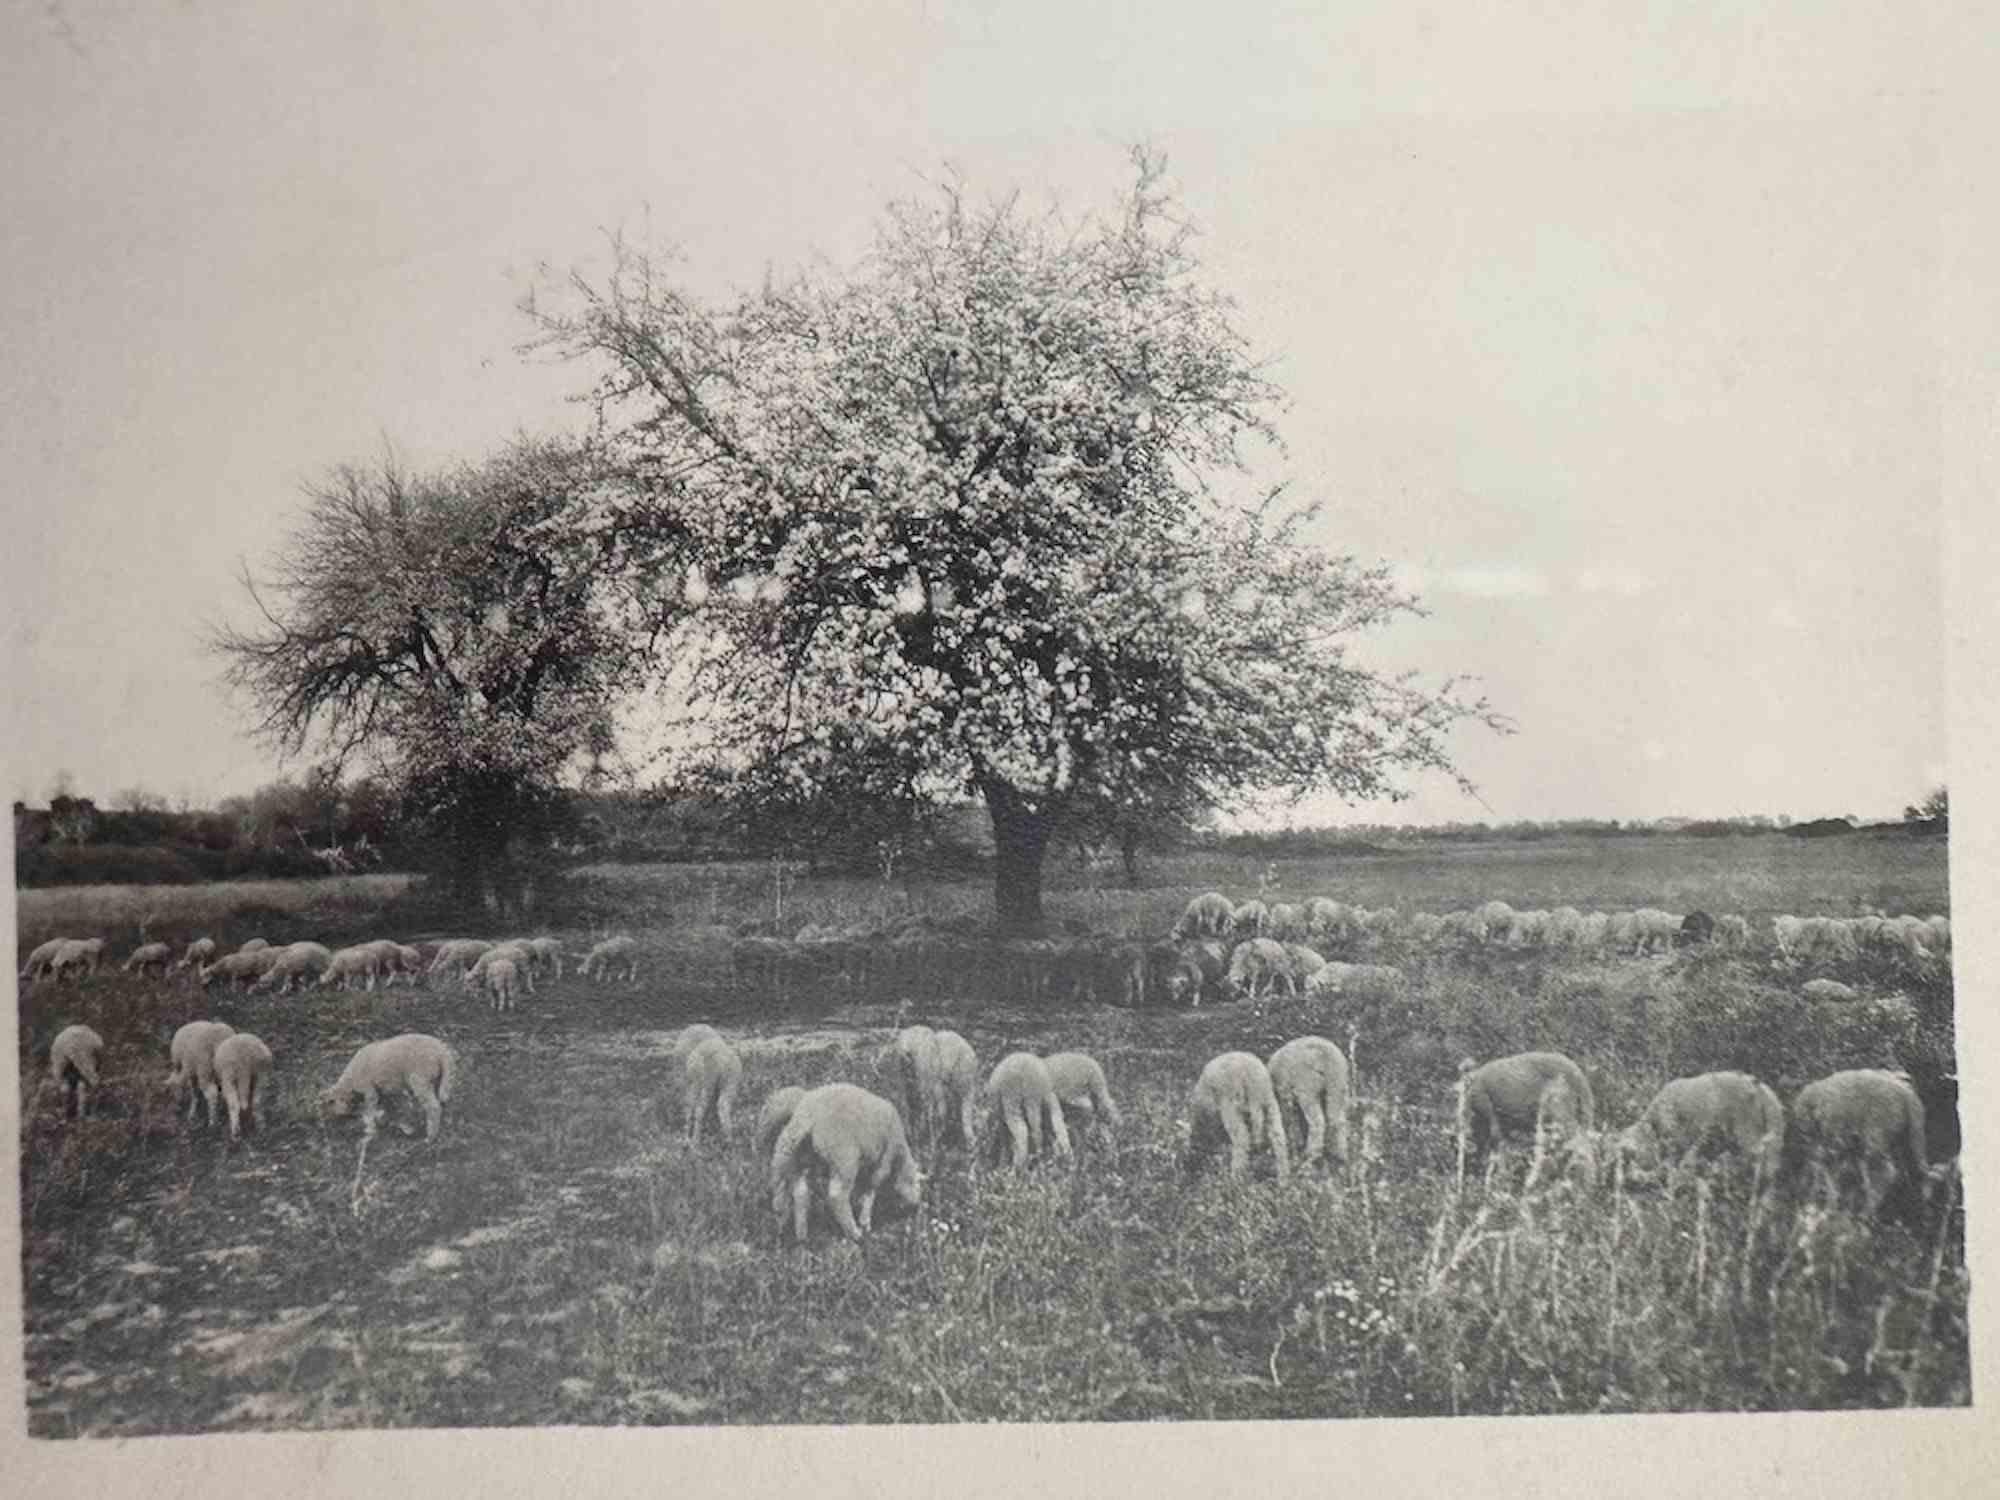 Unknown Figurative Photograph - The Old Days Photo - Sheeps in Tuscan Maremma - vintage photo - 20th Century